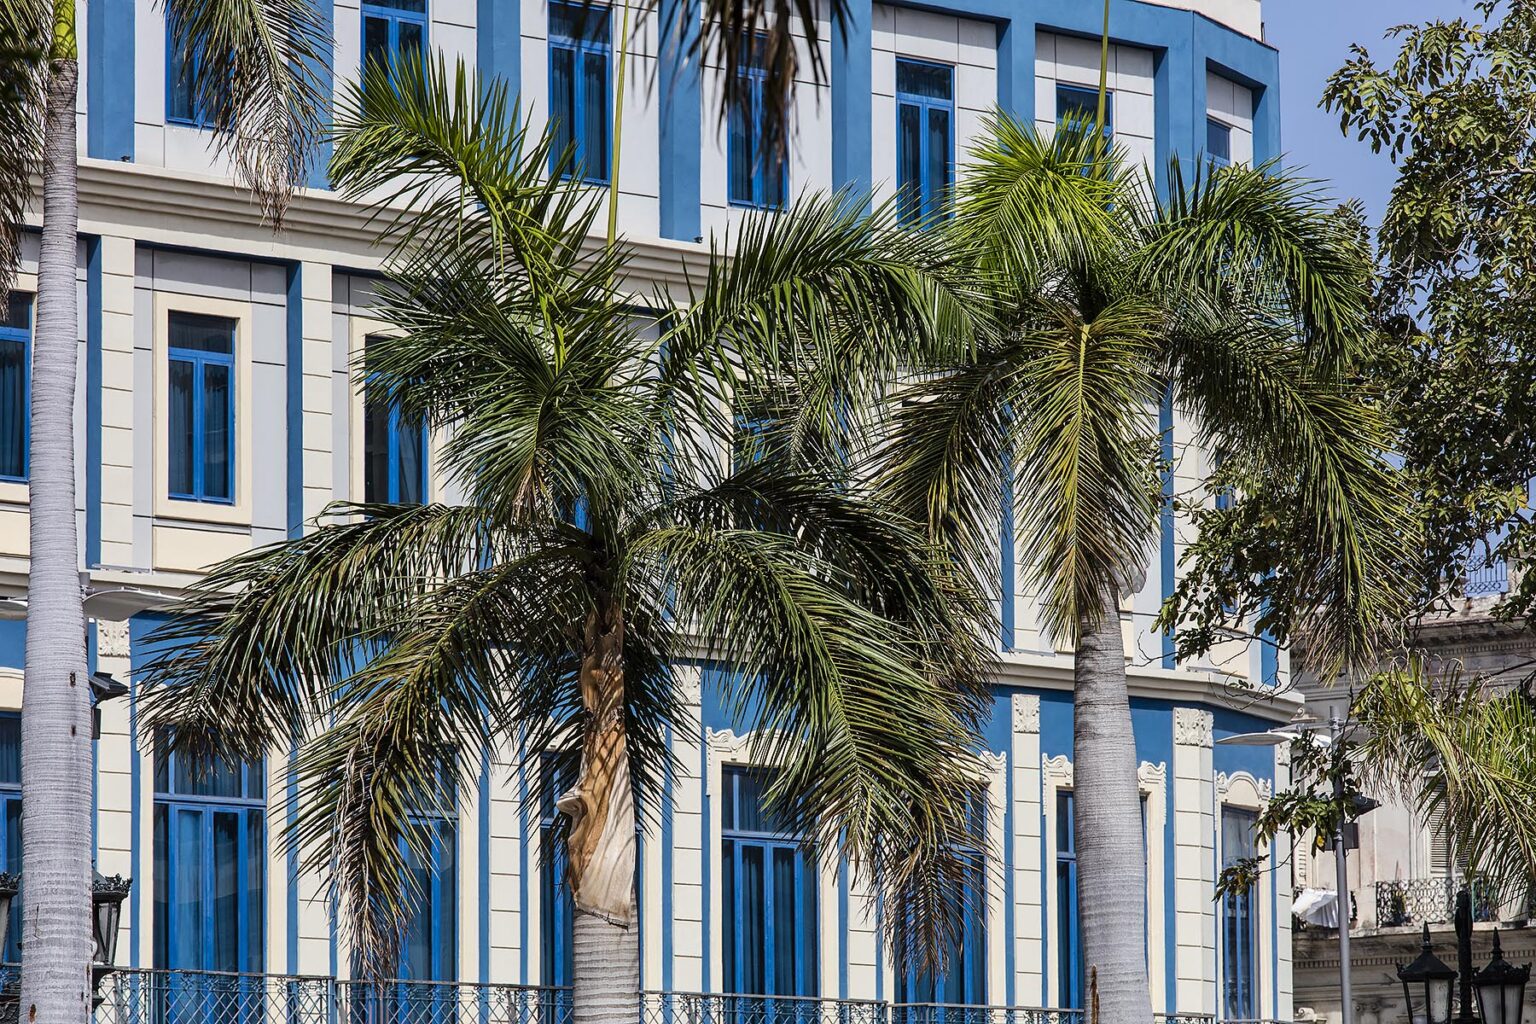 Palm trees and classic architecture - HAVANA, CUBA